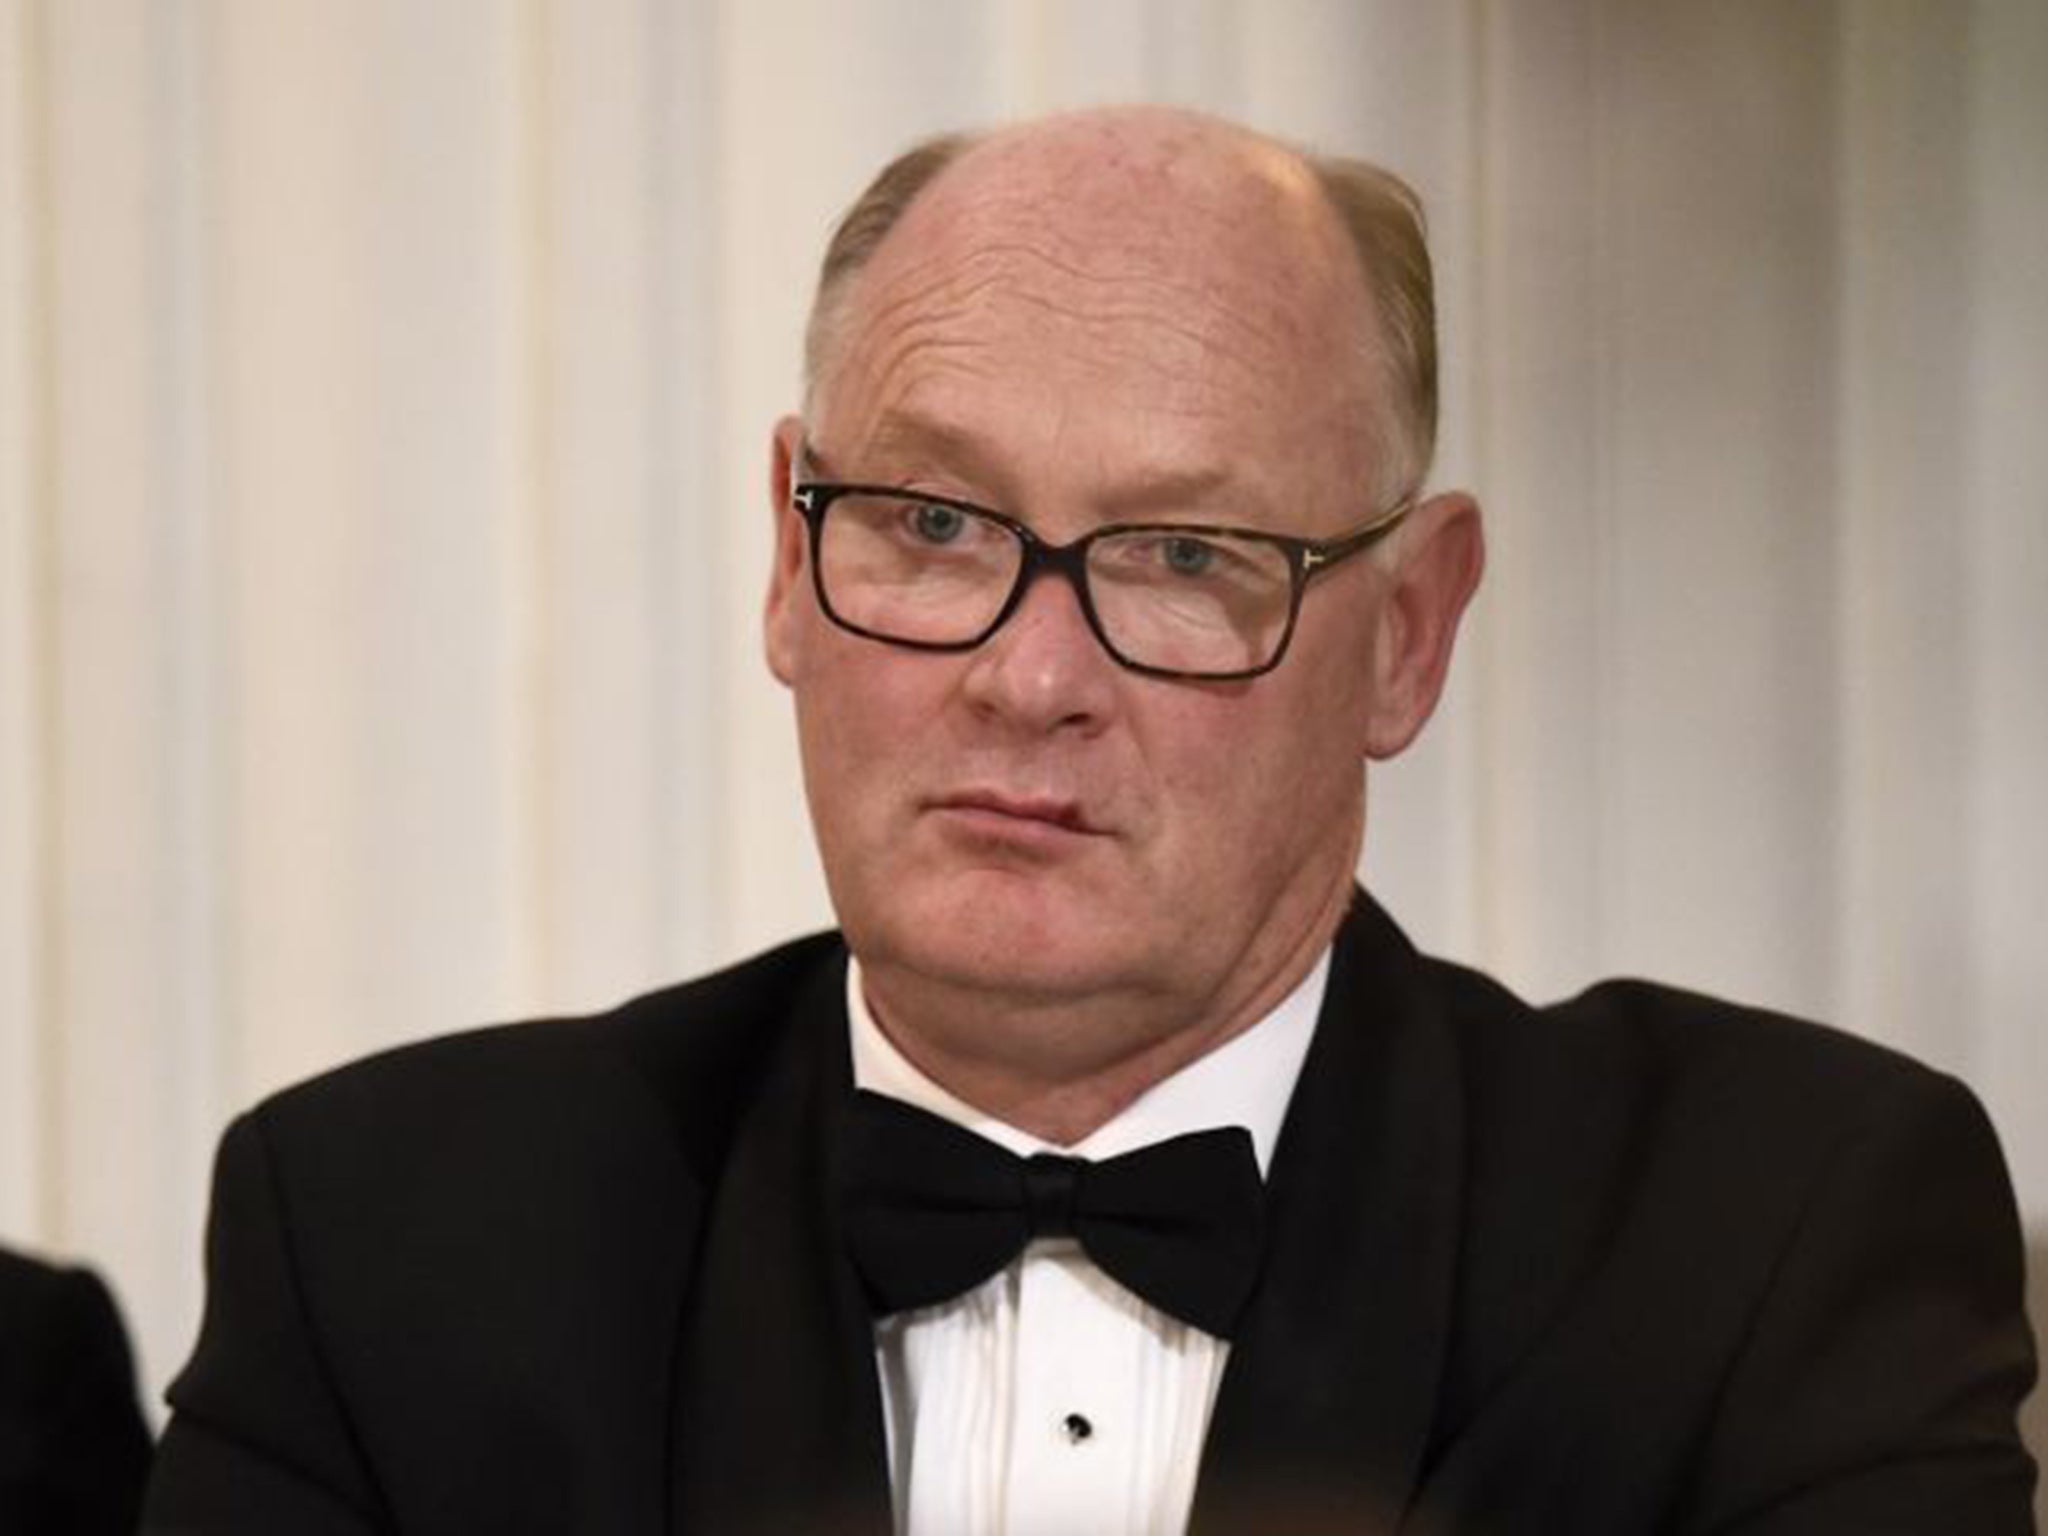 Analysts expect Douglas Flint to be replaced by an outsider as the bank makes a clean break